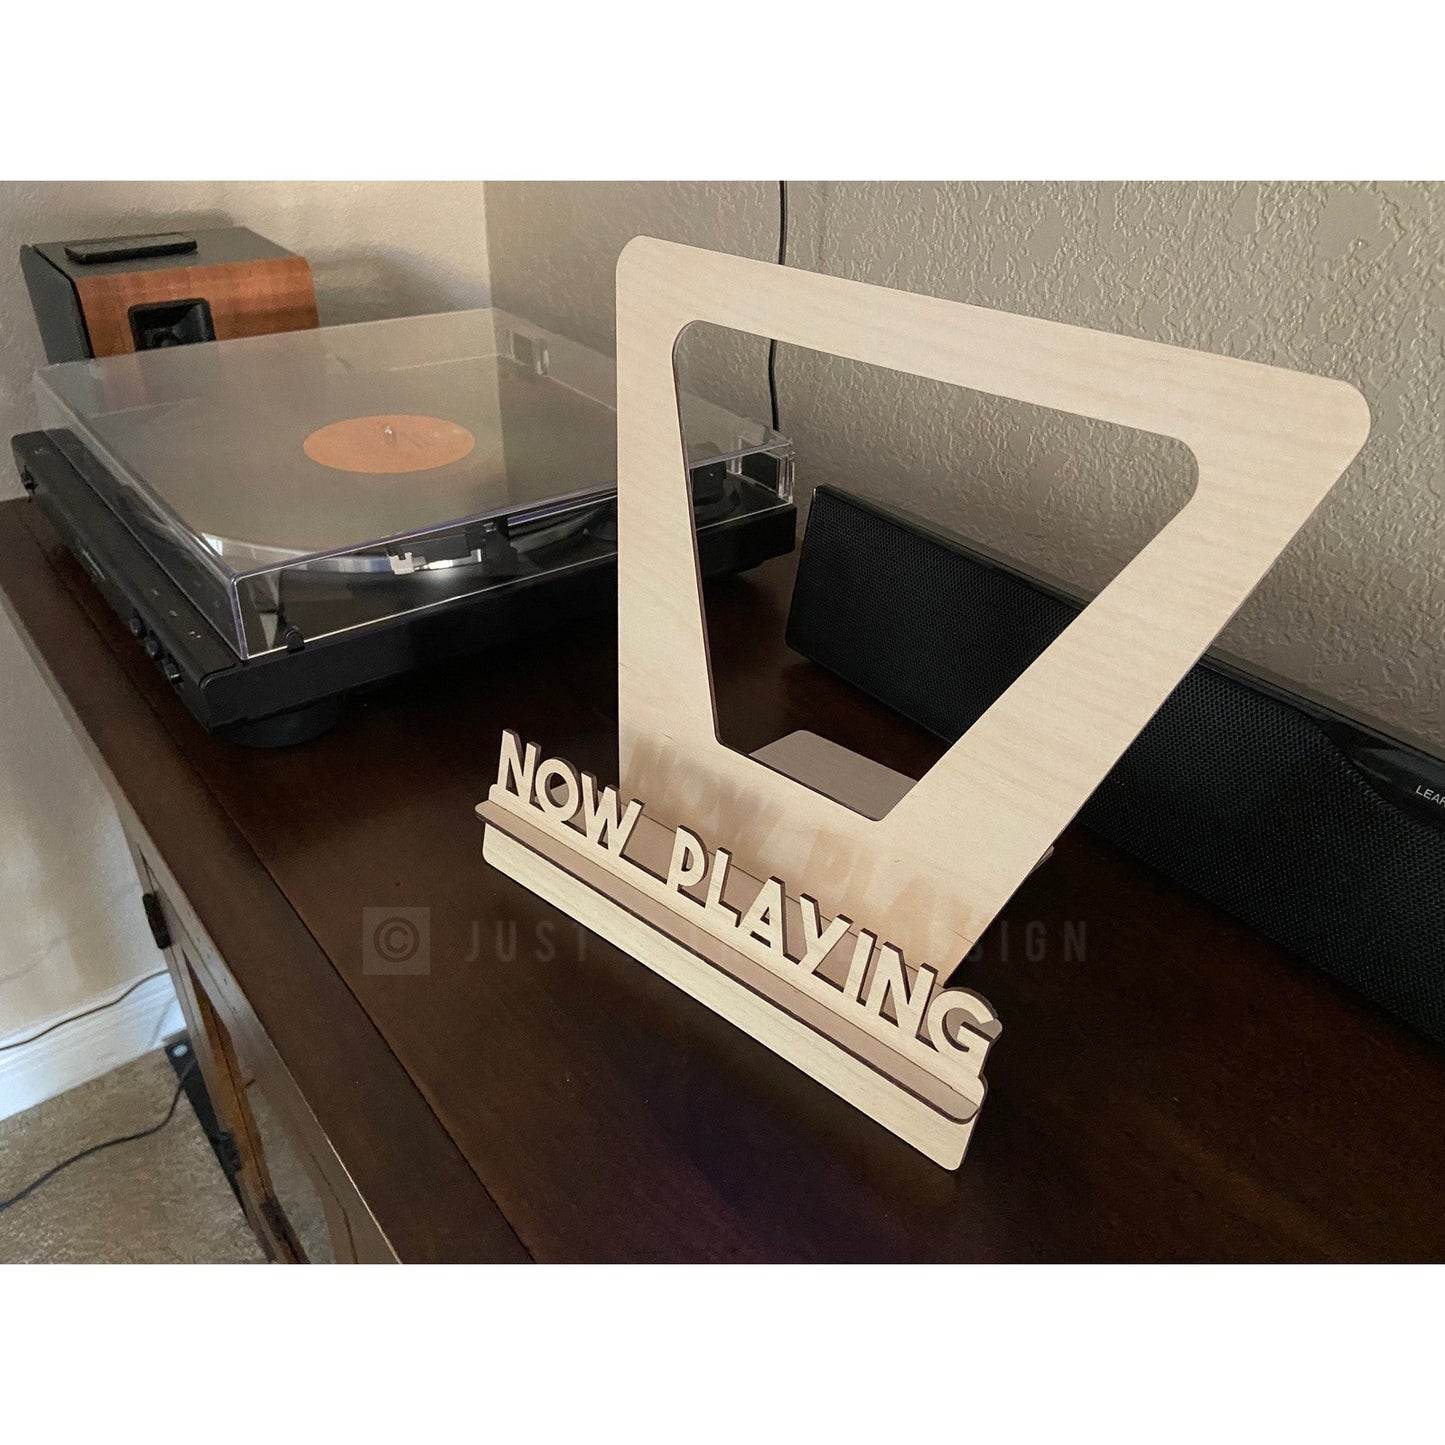 Now Playing Vinyl Record Stand, Now Spinning Record Display, LP Stand, Wood Album Stand, Music Holder